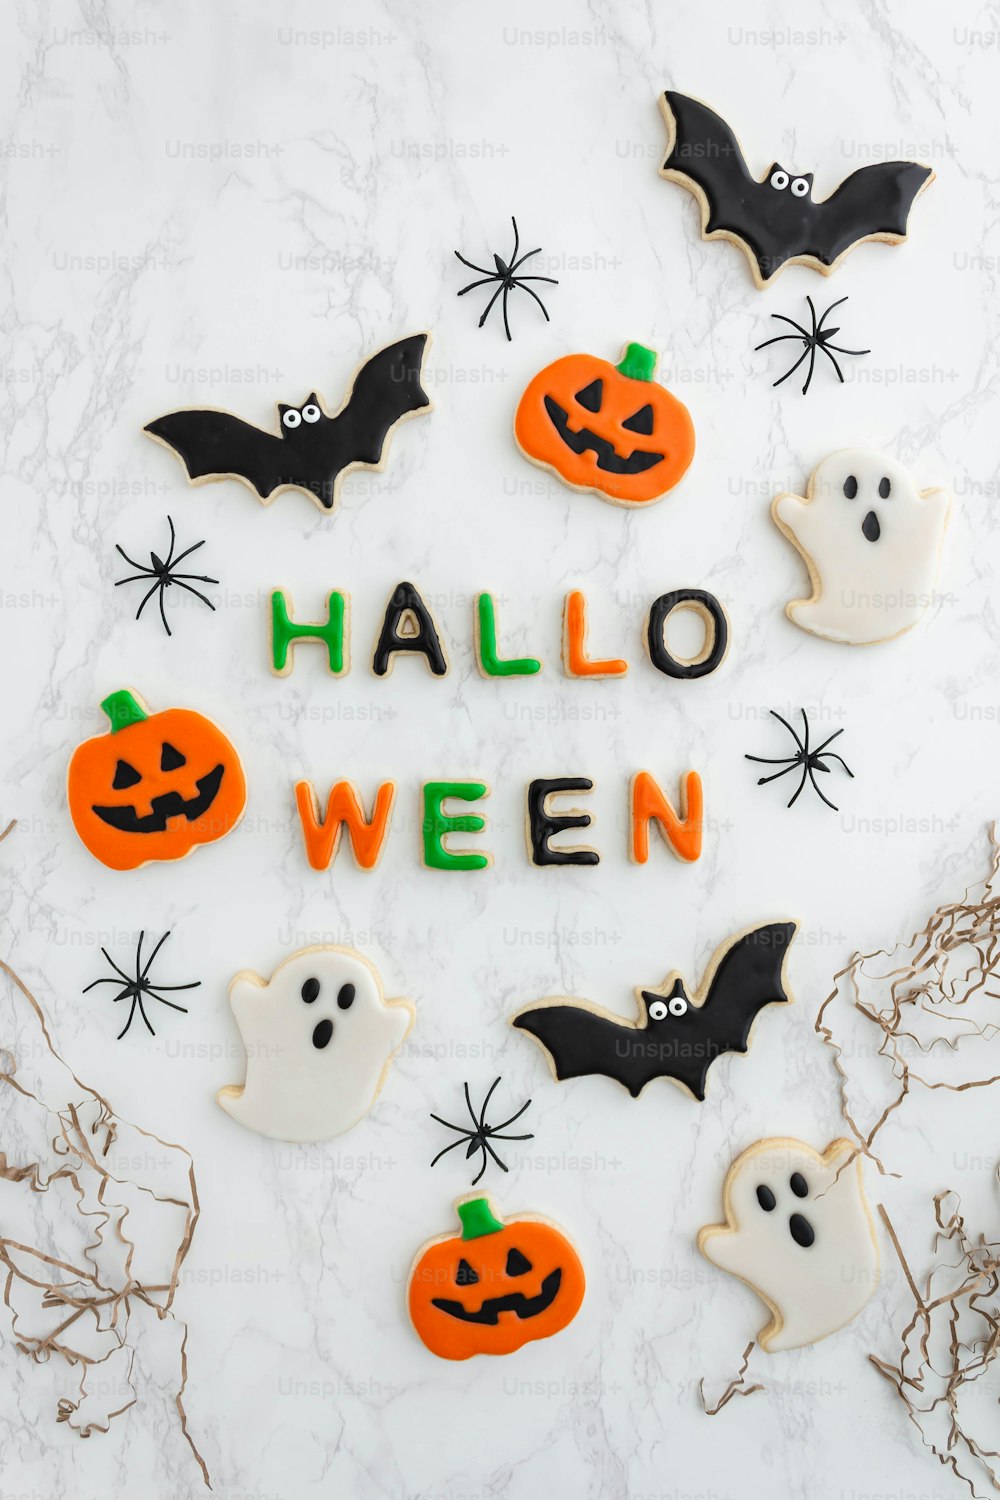 decorated halloween cookies arranged in the shape of a wreath